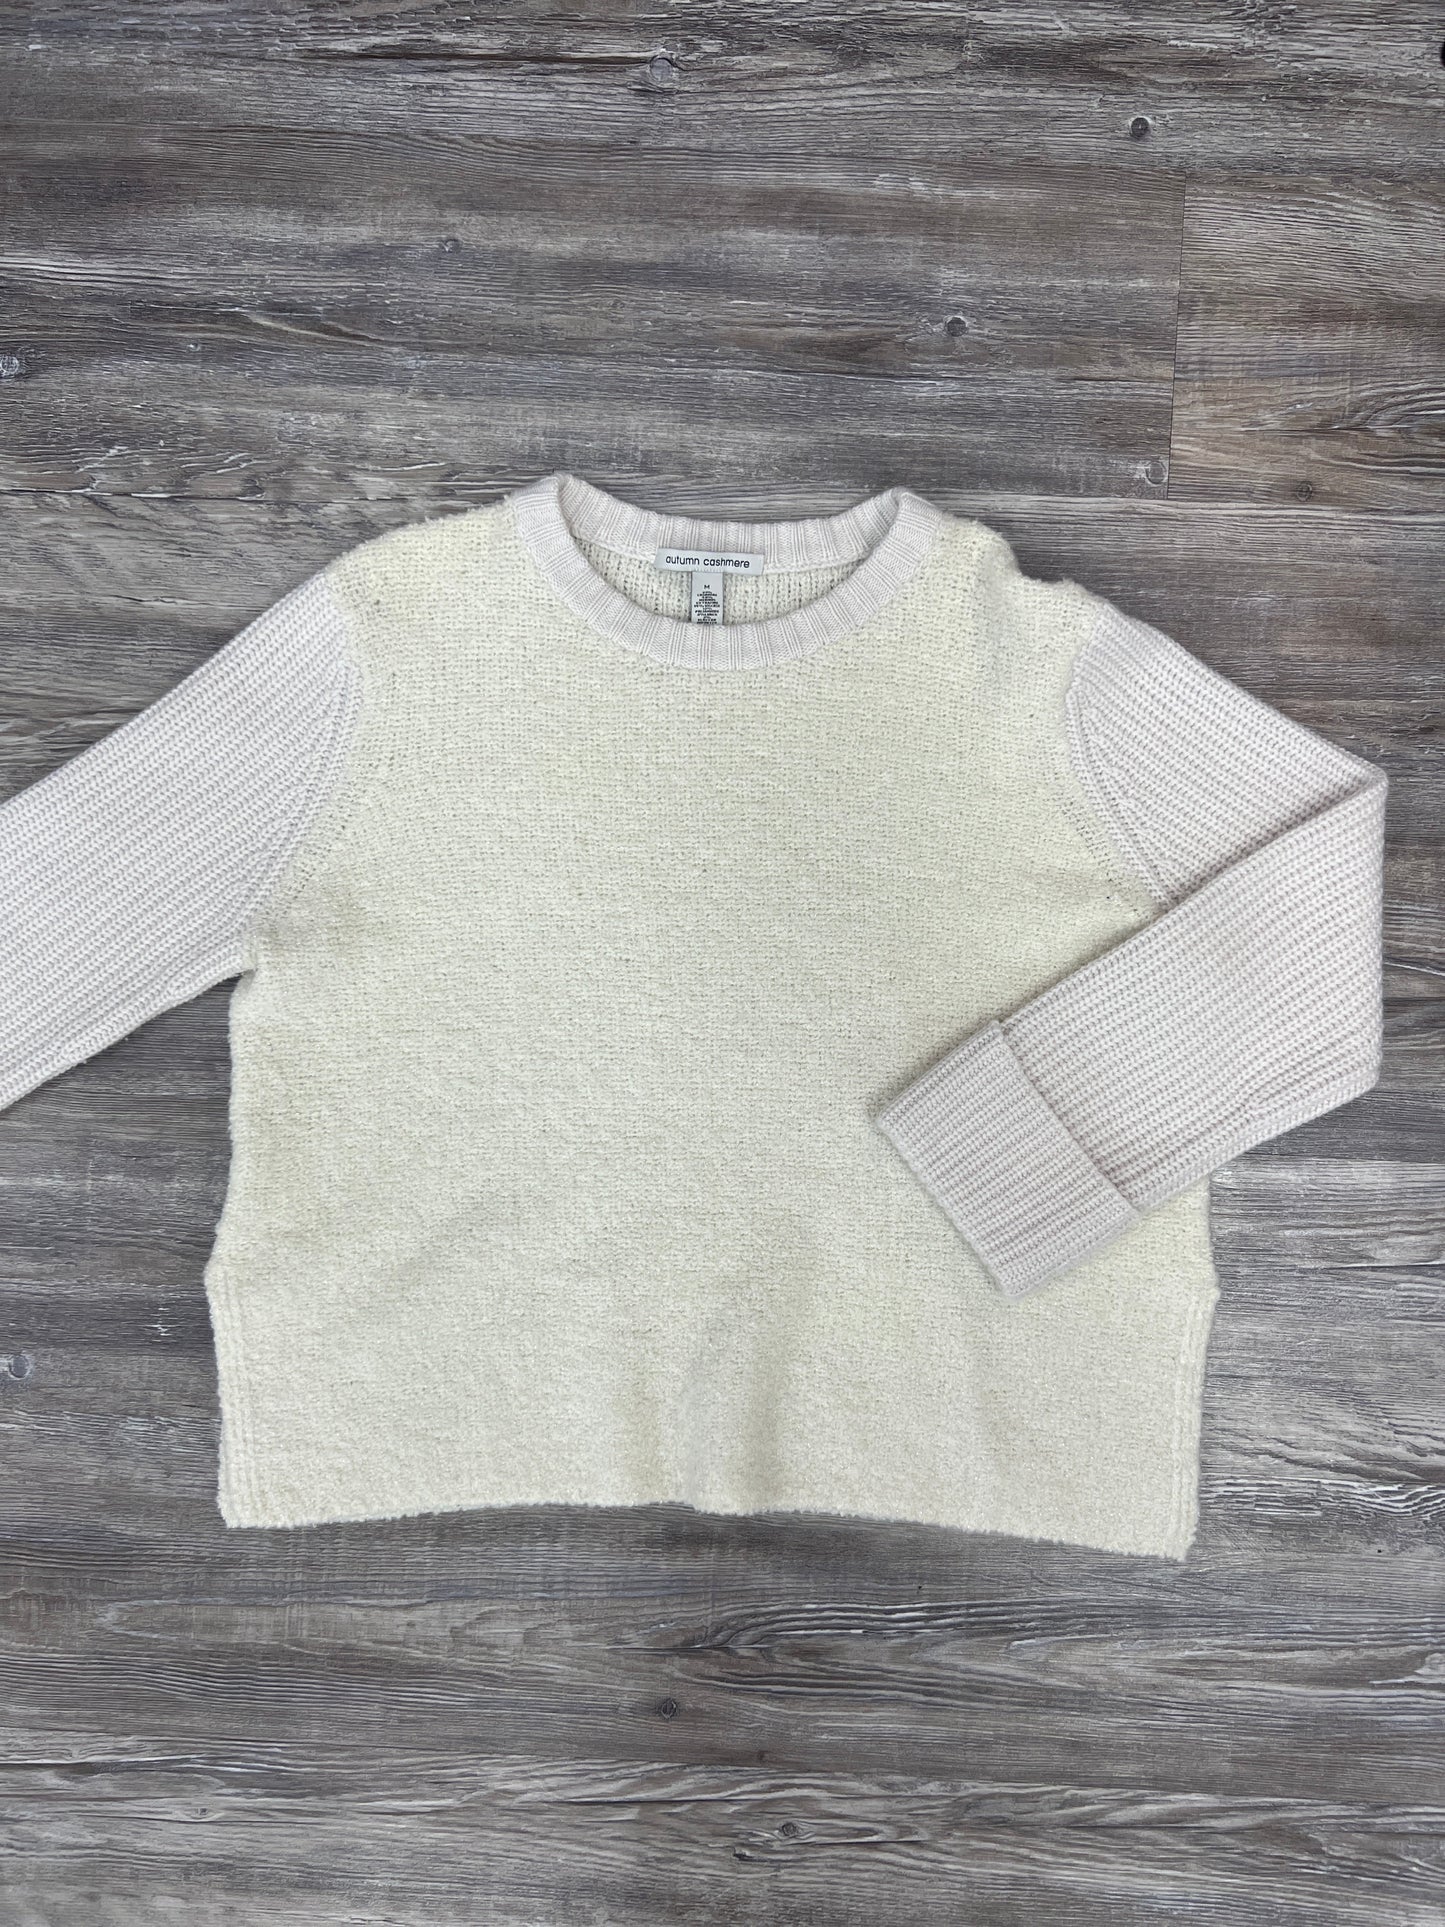 Sweater By Autumn Cashmere  Size: 0